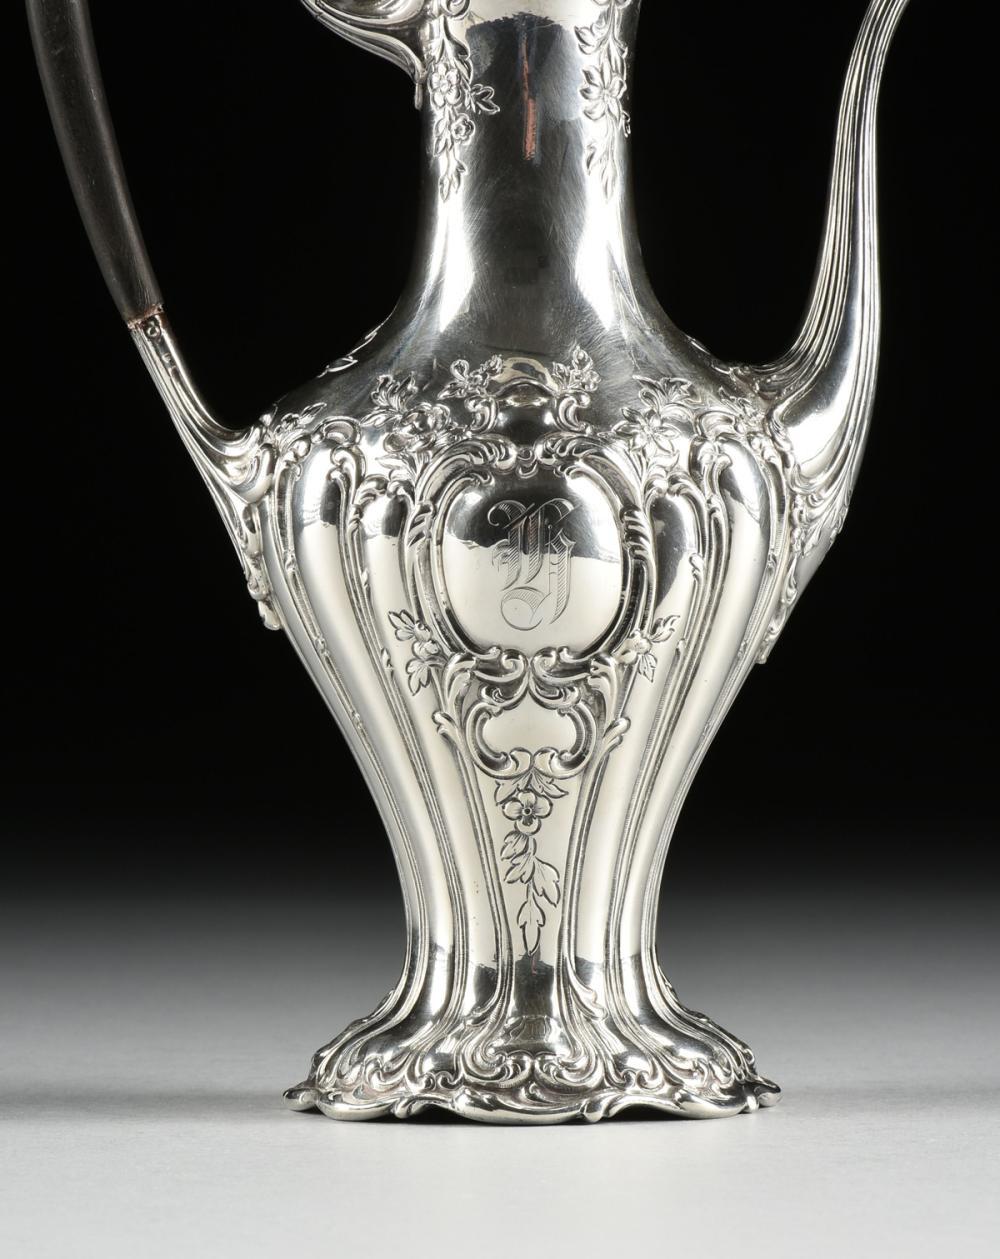 A Gorham Mfg. Co. sterling silver and ebony coffee pot, Providence, Rhode Island, 1903, of elongated baluster form with repoussé acanthus scroll, floral, and foliate decoration, and scroll bordered reserves at the front and back monogrammed 